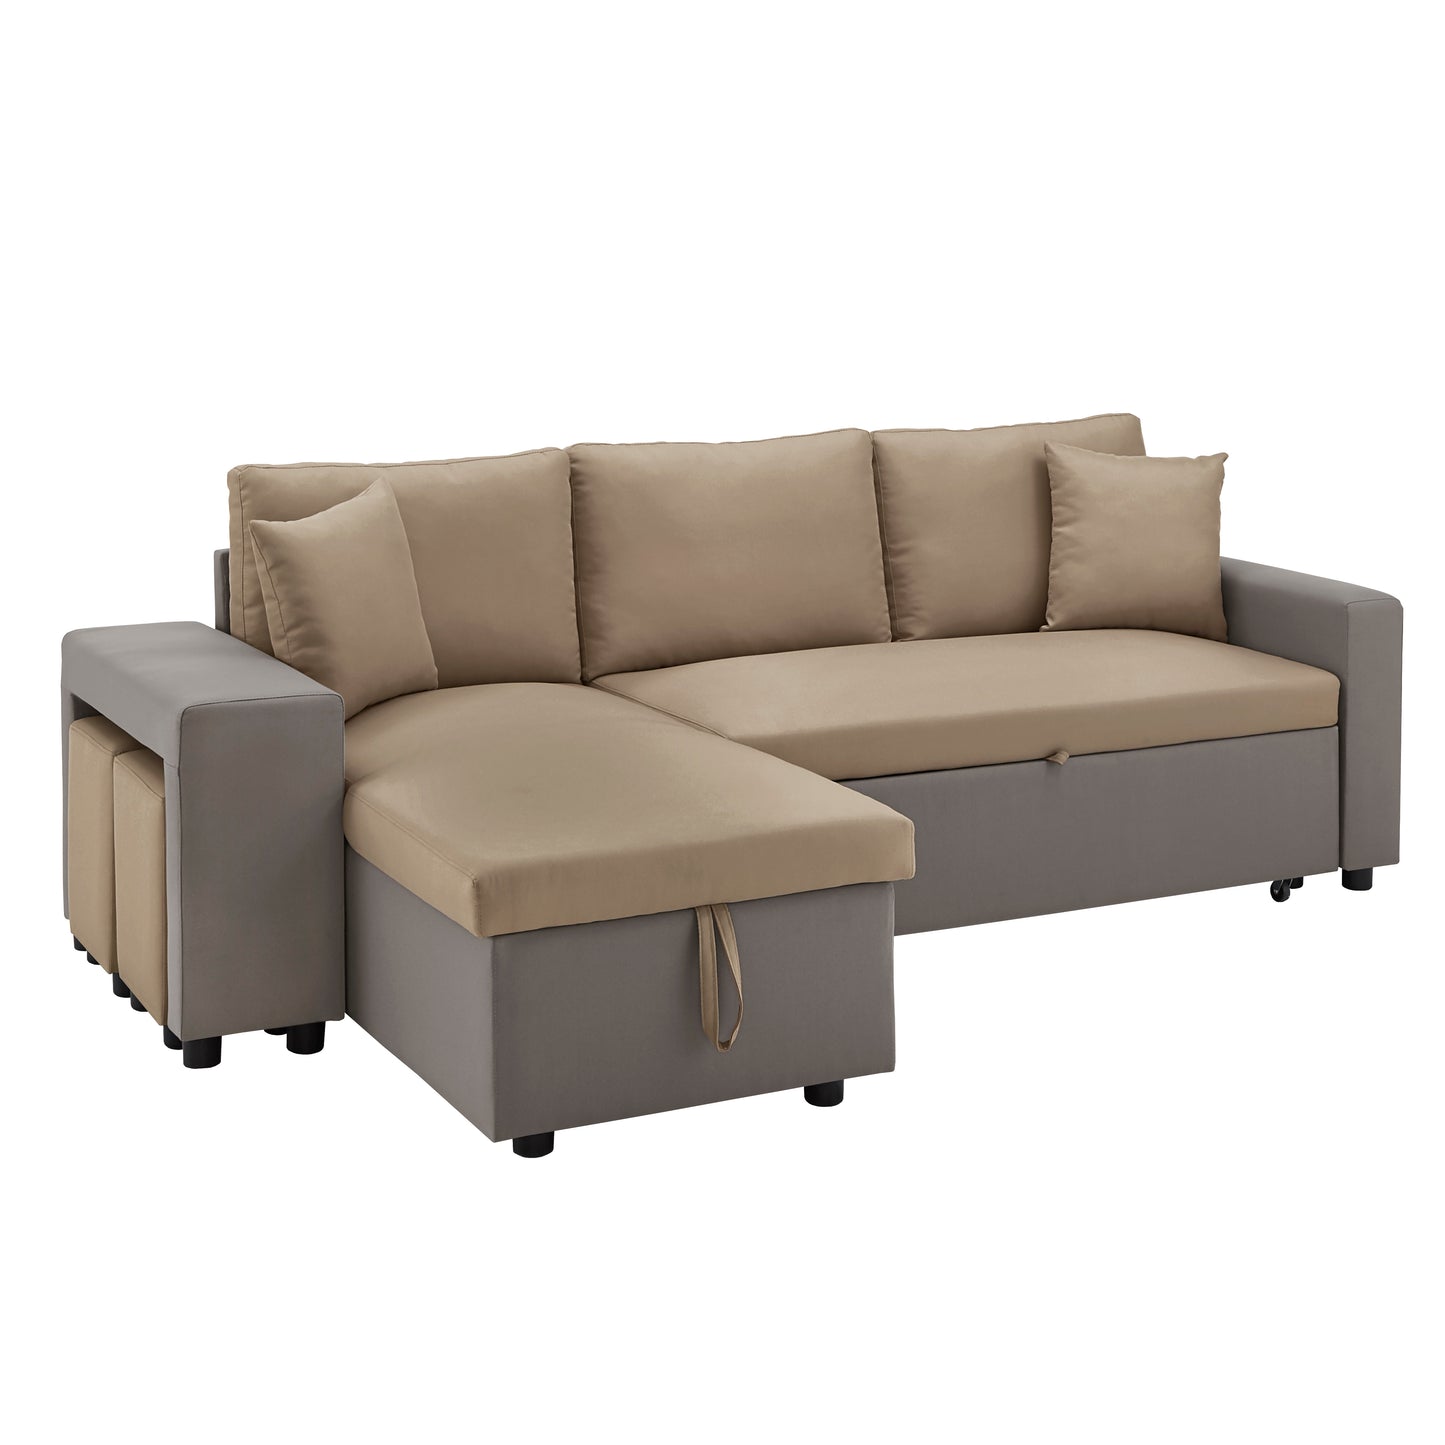 Multifunctional Two-Tone Fabric Convertible Chaise Sofa with Two Ottomans, Two Pillows, and Storage - Brown